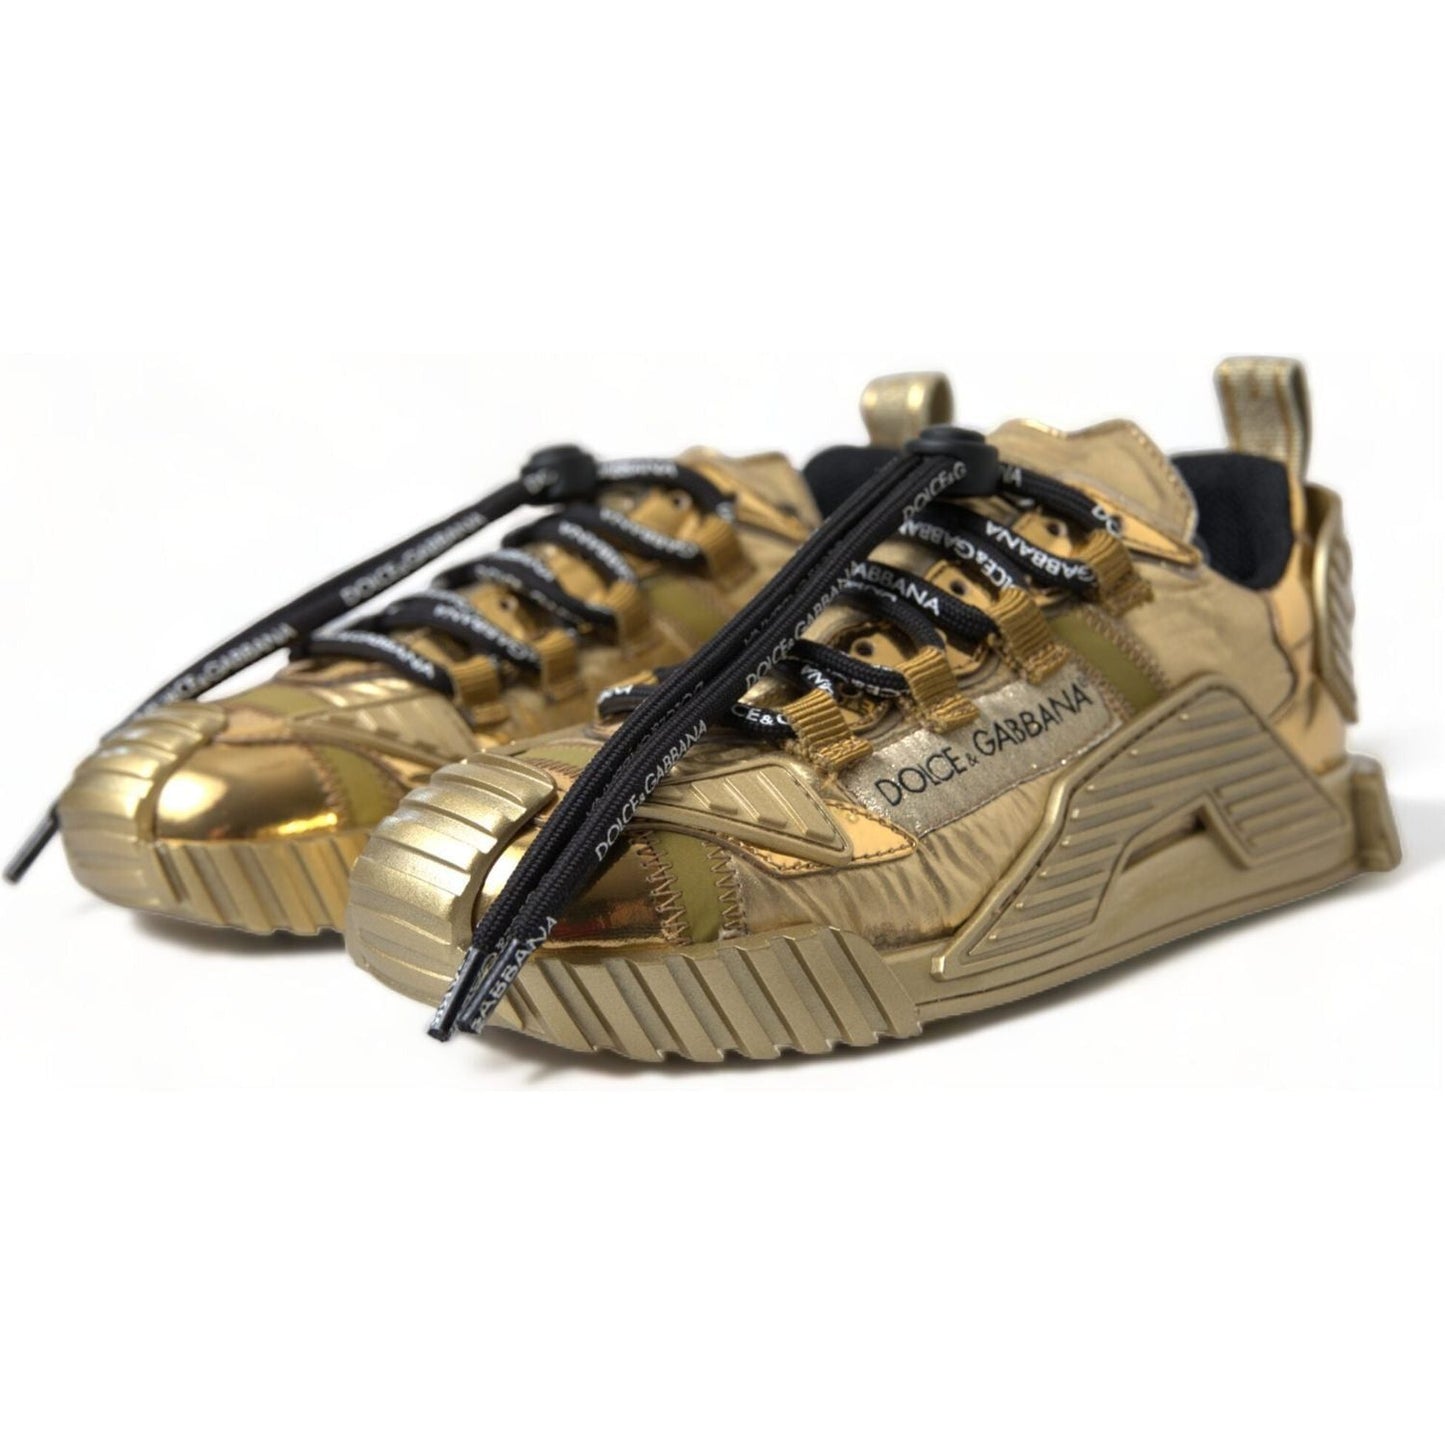 Dolce & Gabbana D&G Gleaming Gold-Toned Luxury Sneakers metallic-gold-ns1-low-top-sneakers-shoes 465A2189-BG-scaled-e48070af-083.jpg